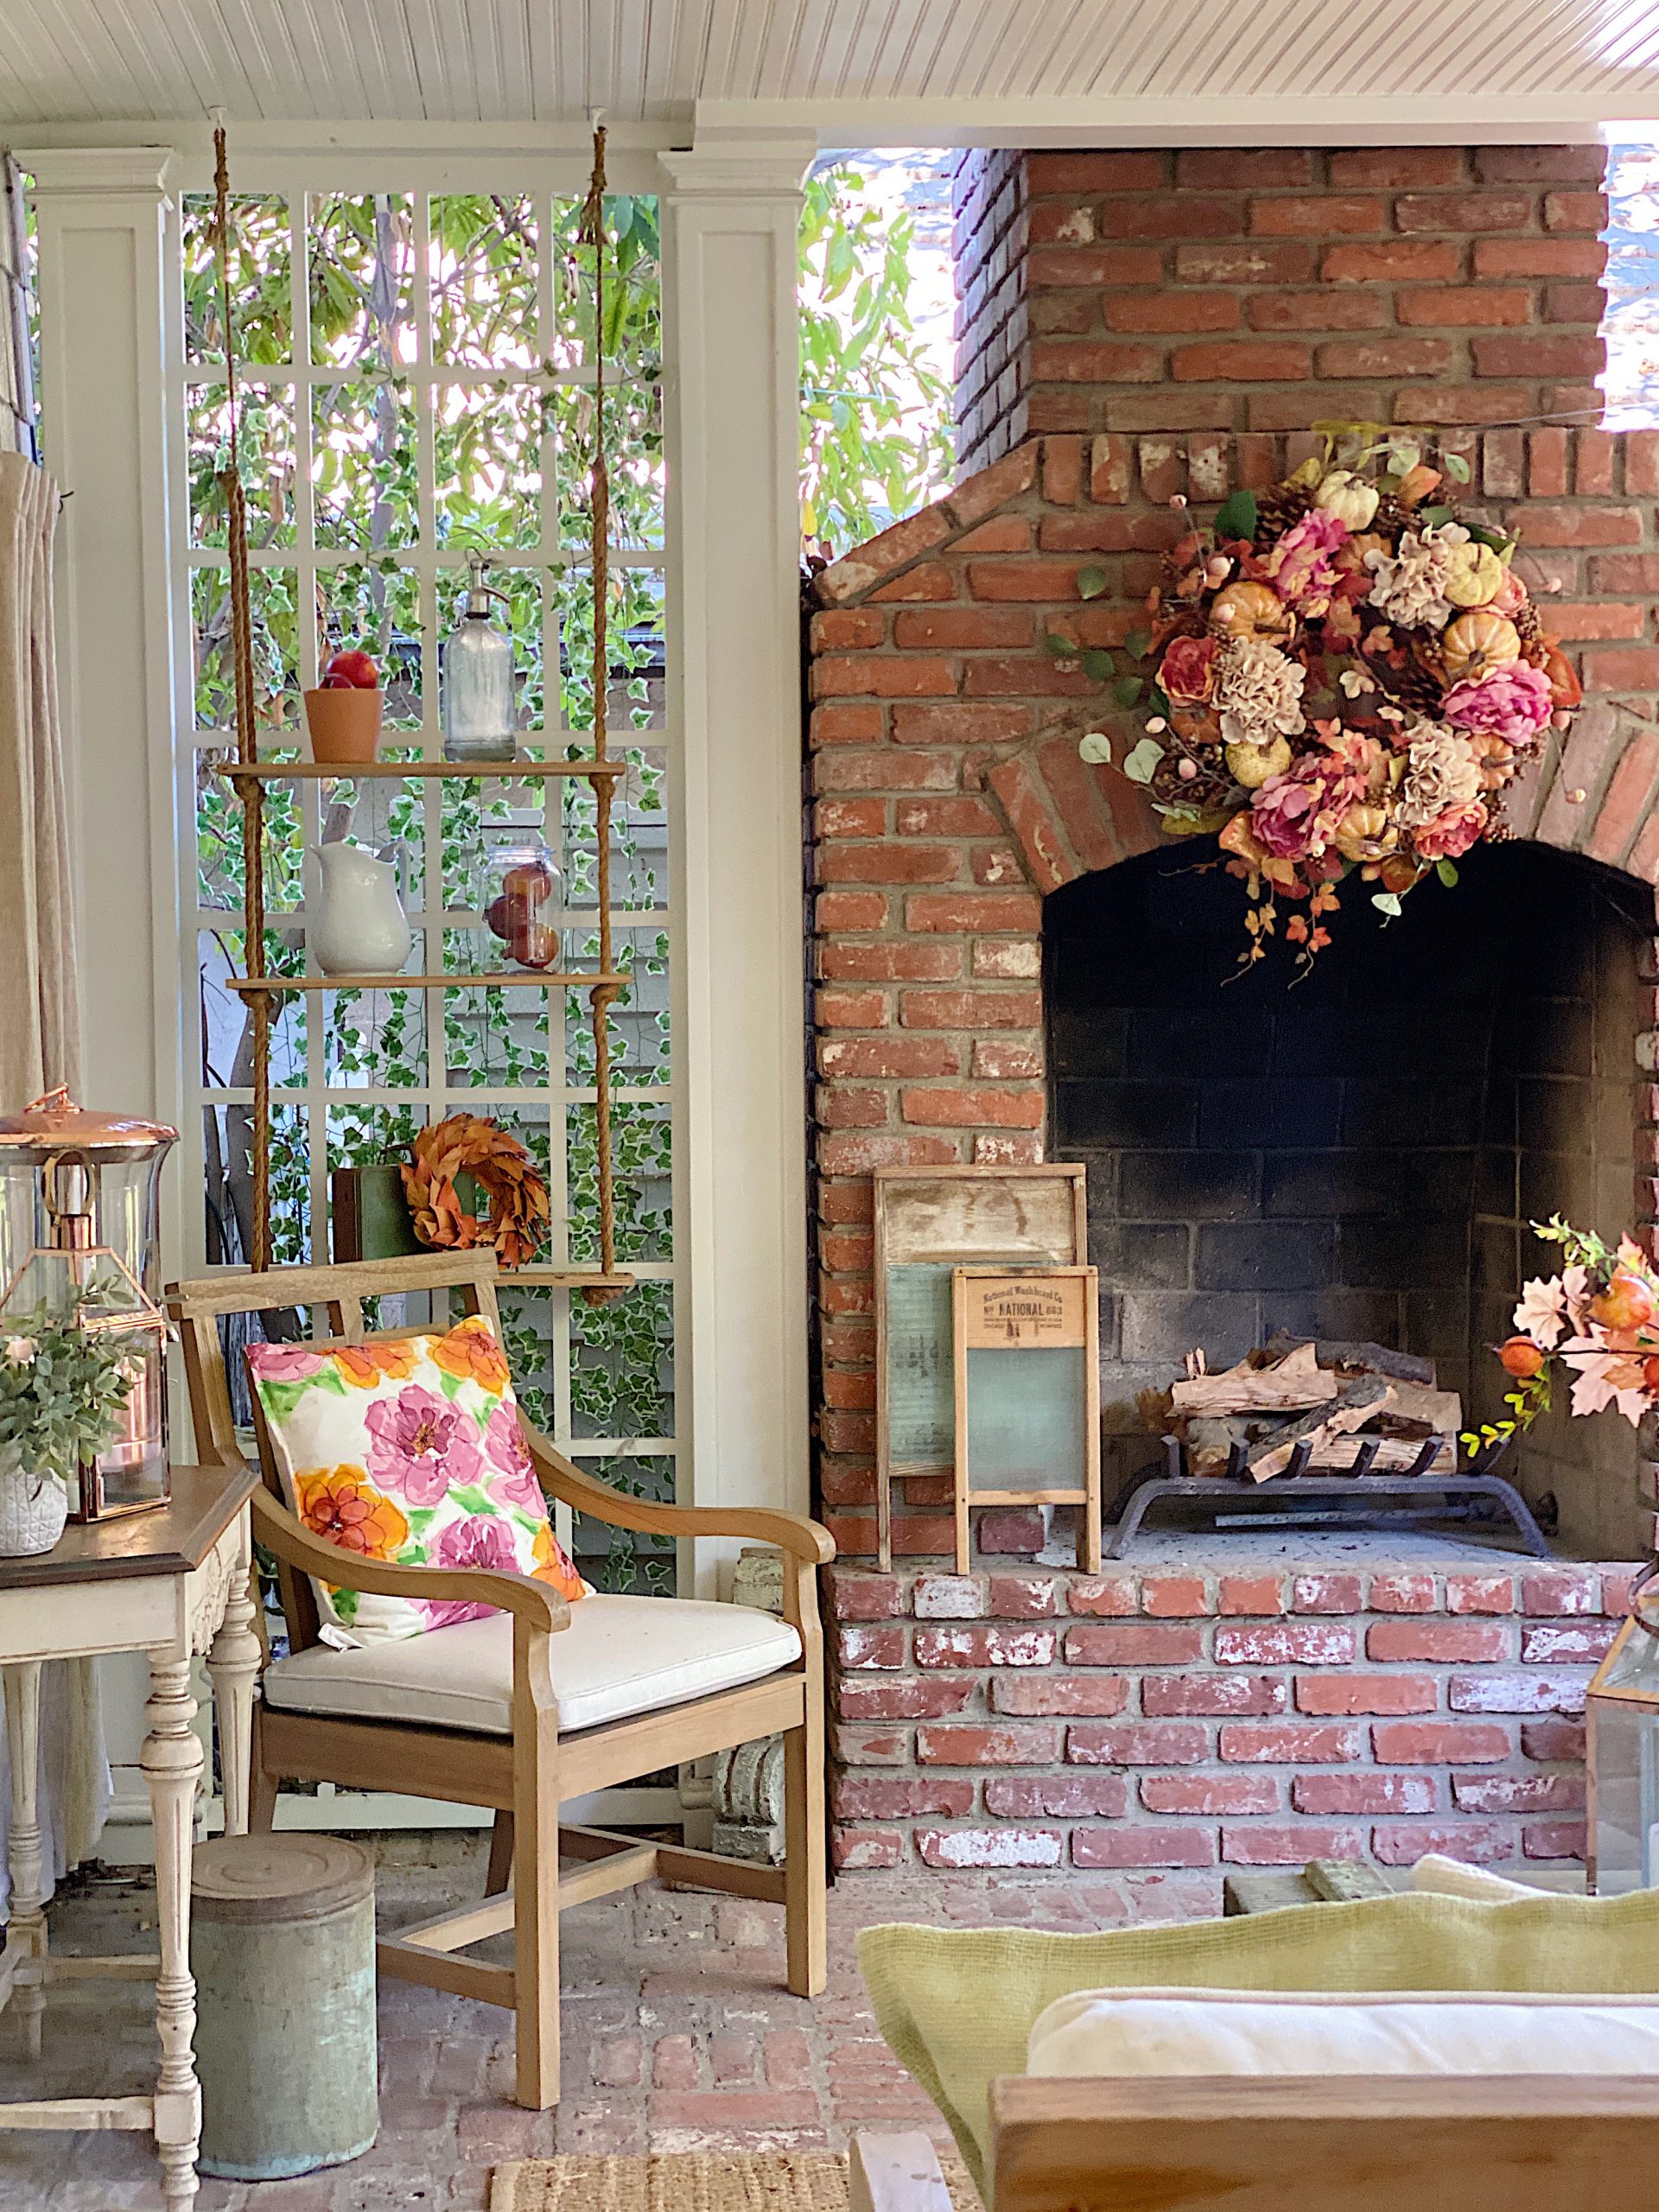 How to Decorate Your Home with Fall Decor